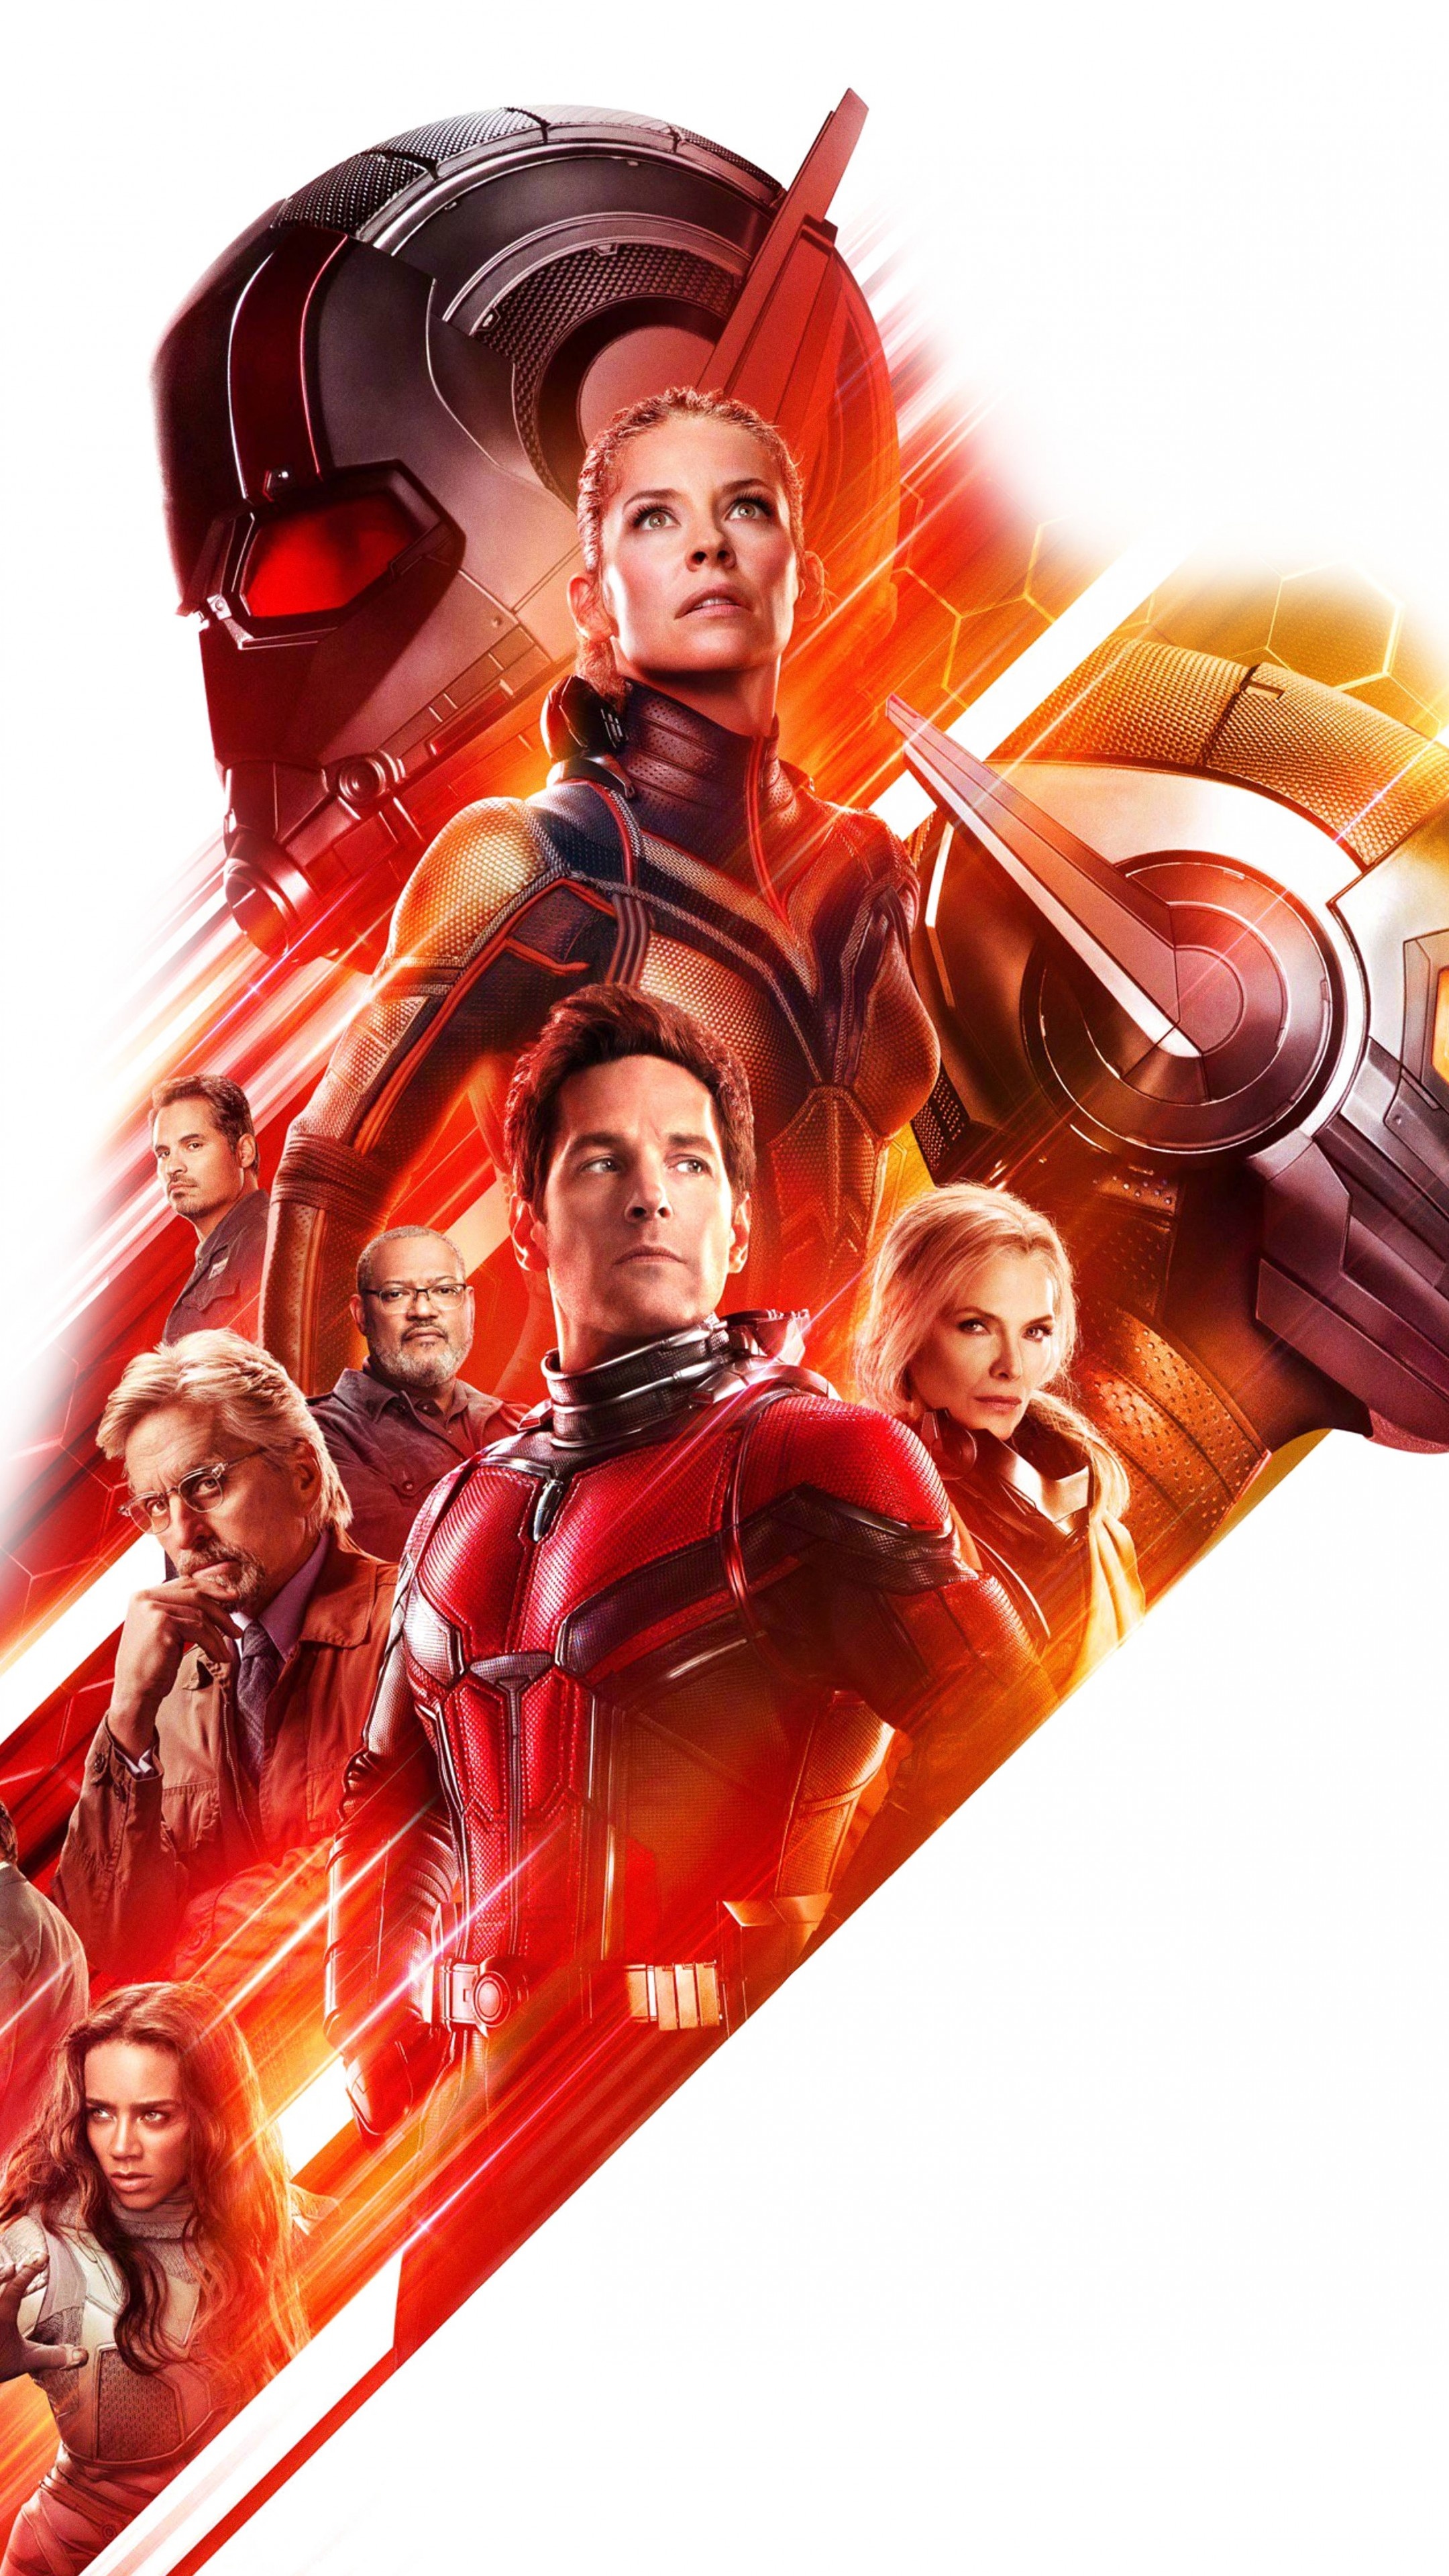 Evangeline Lilly, Ant-Man and The Wasp, Movies, Actress, 2160x3840 4K Phone